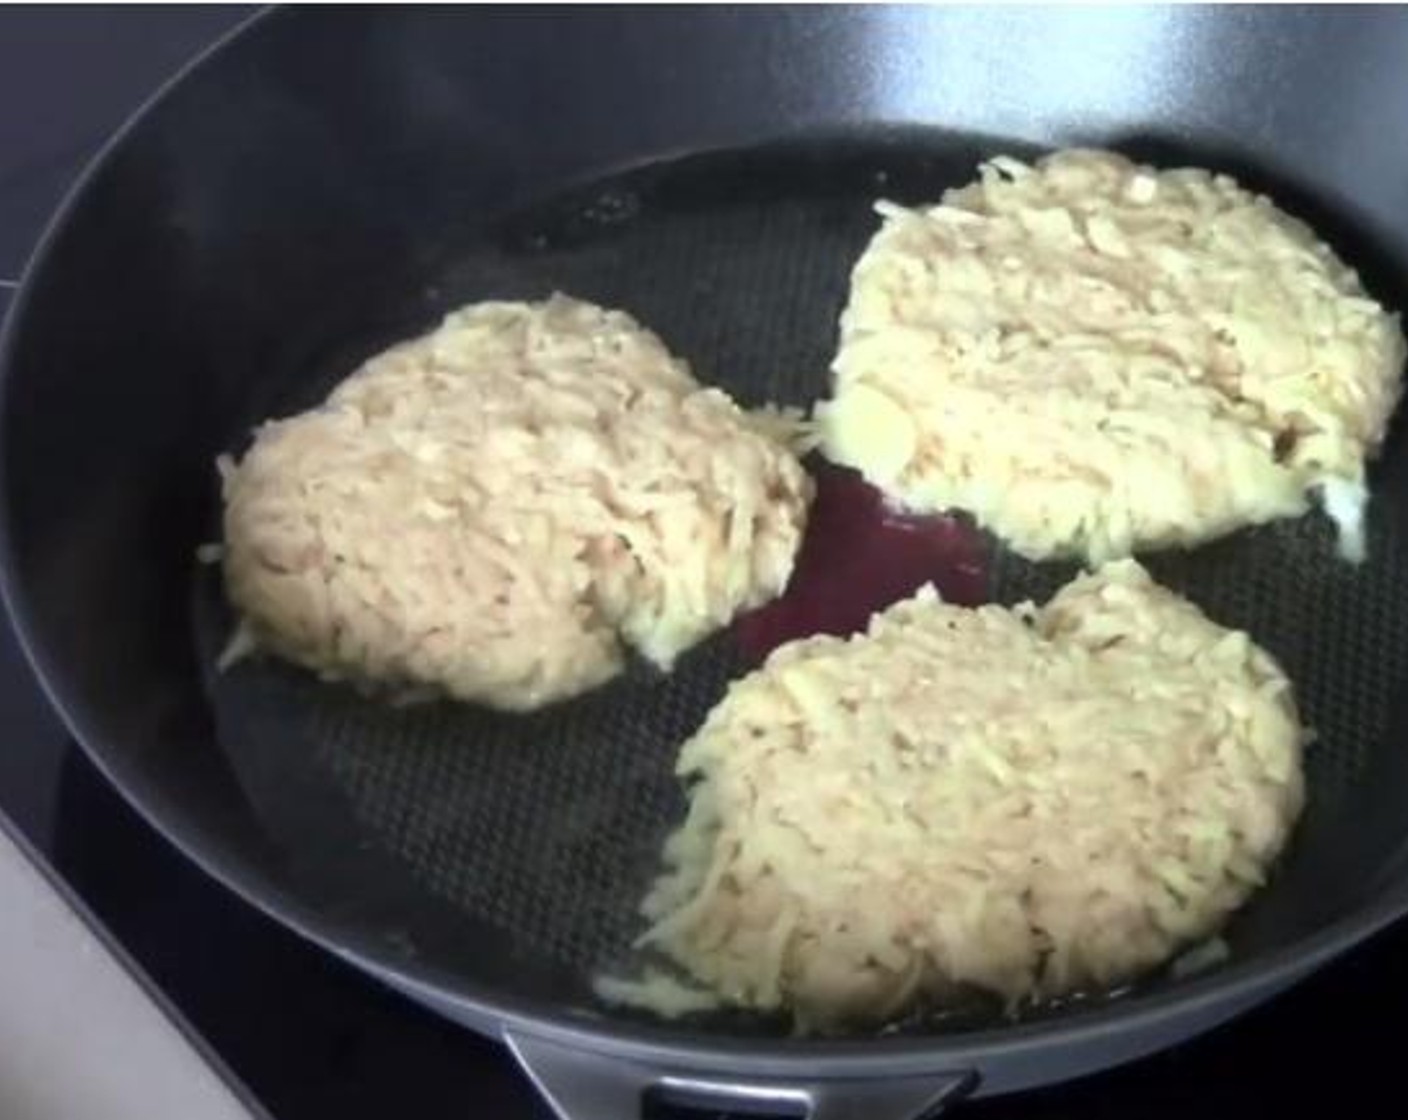 step 3 Divide the potato mix into small patties. Cook inside a frying pan with some oil, for about 2 minutes each side.